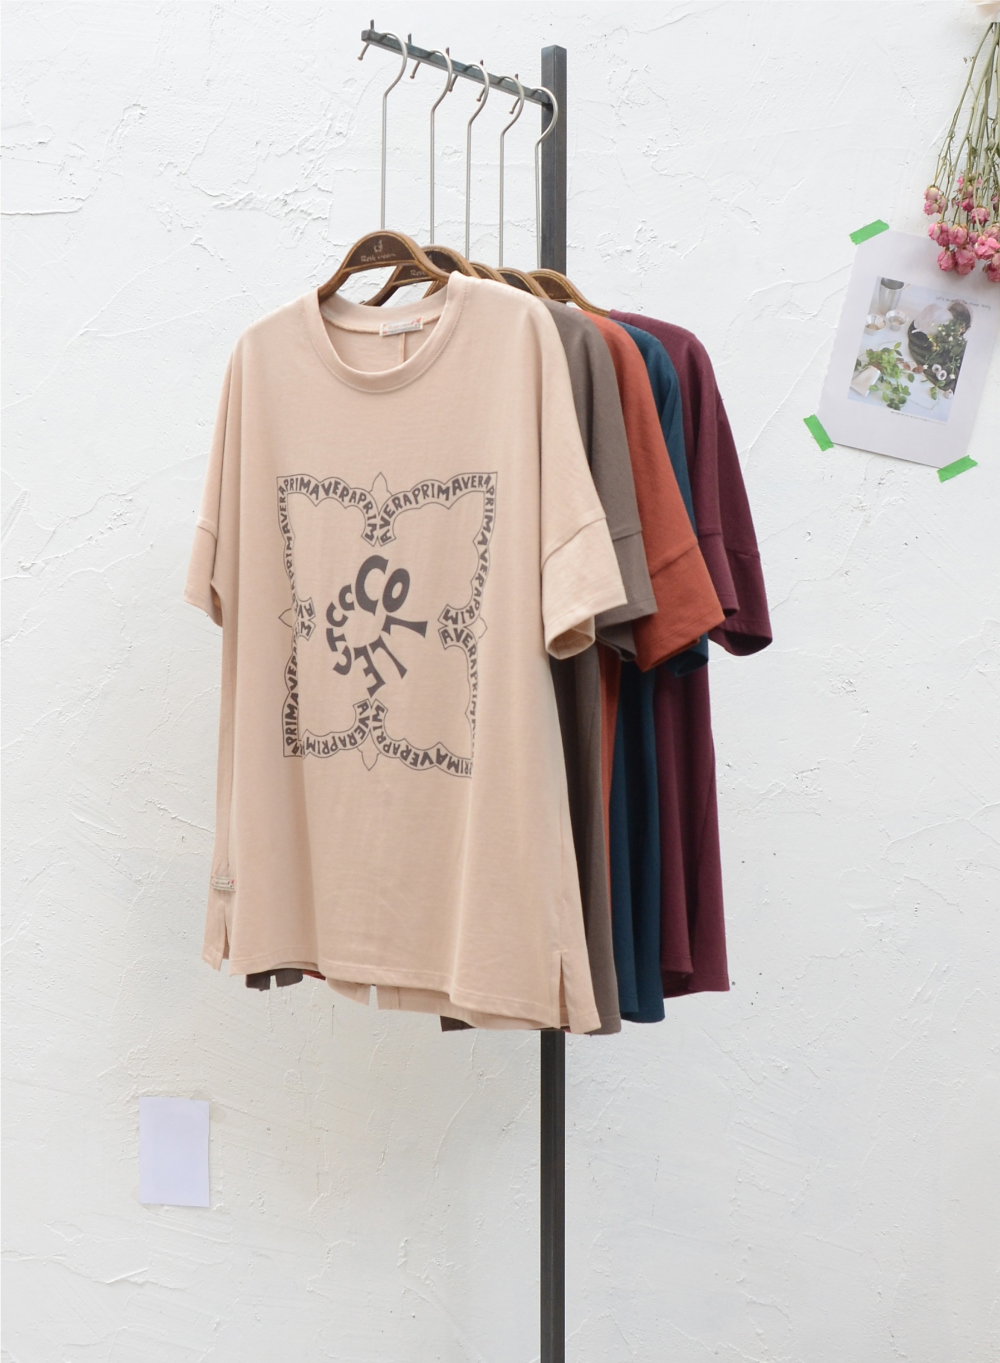 short sleeved tee cream color image-S1L71